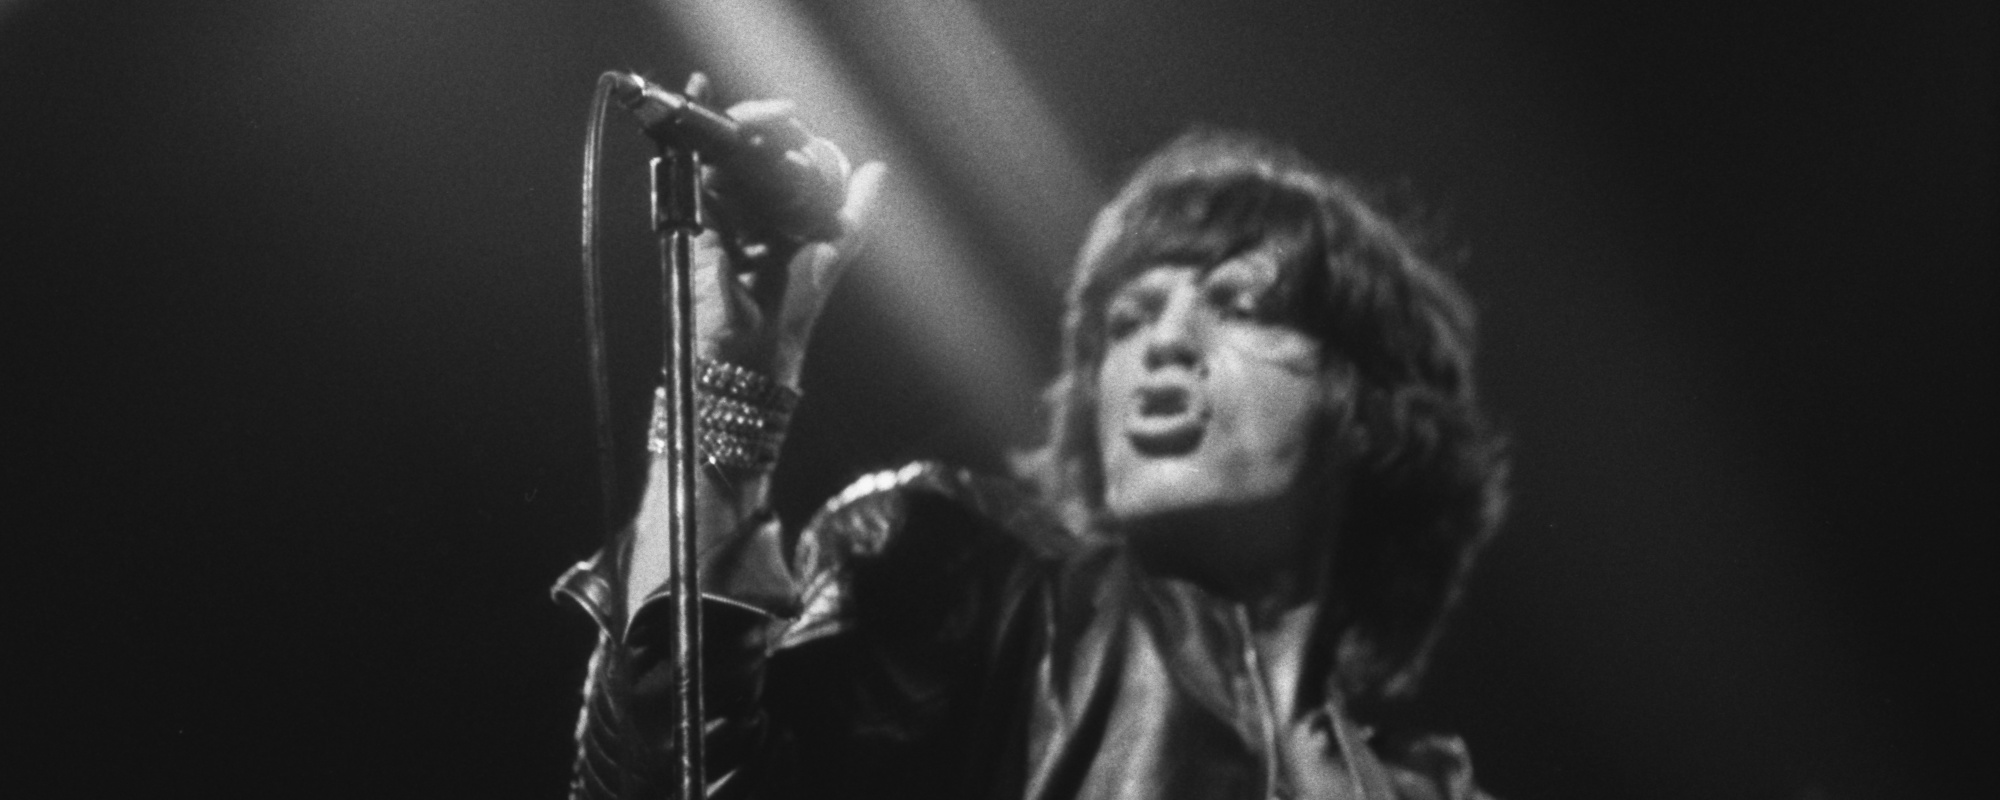 Ranking the 5 Best Songs on The Rolling Stones Album ‘Some Girls’